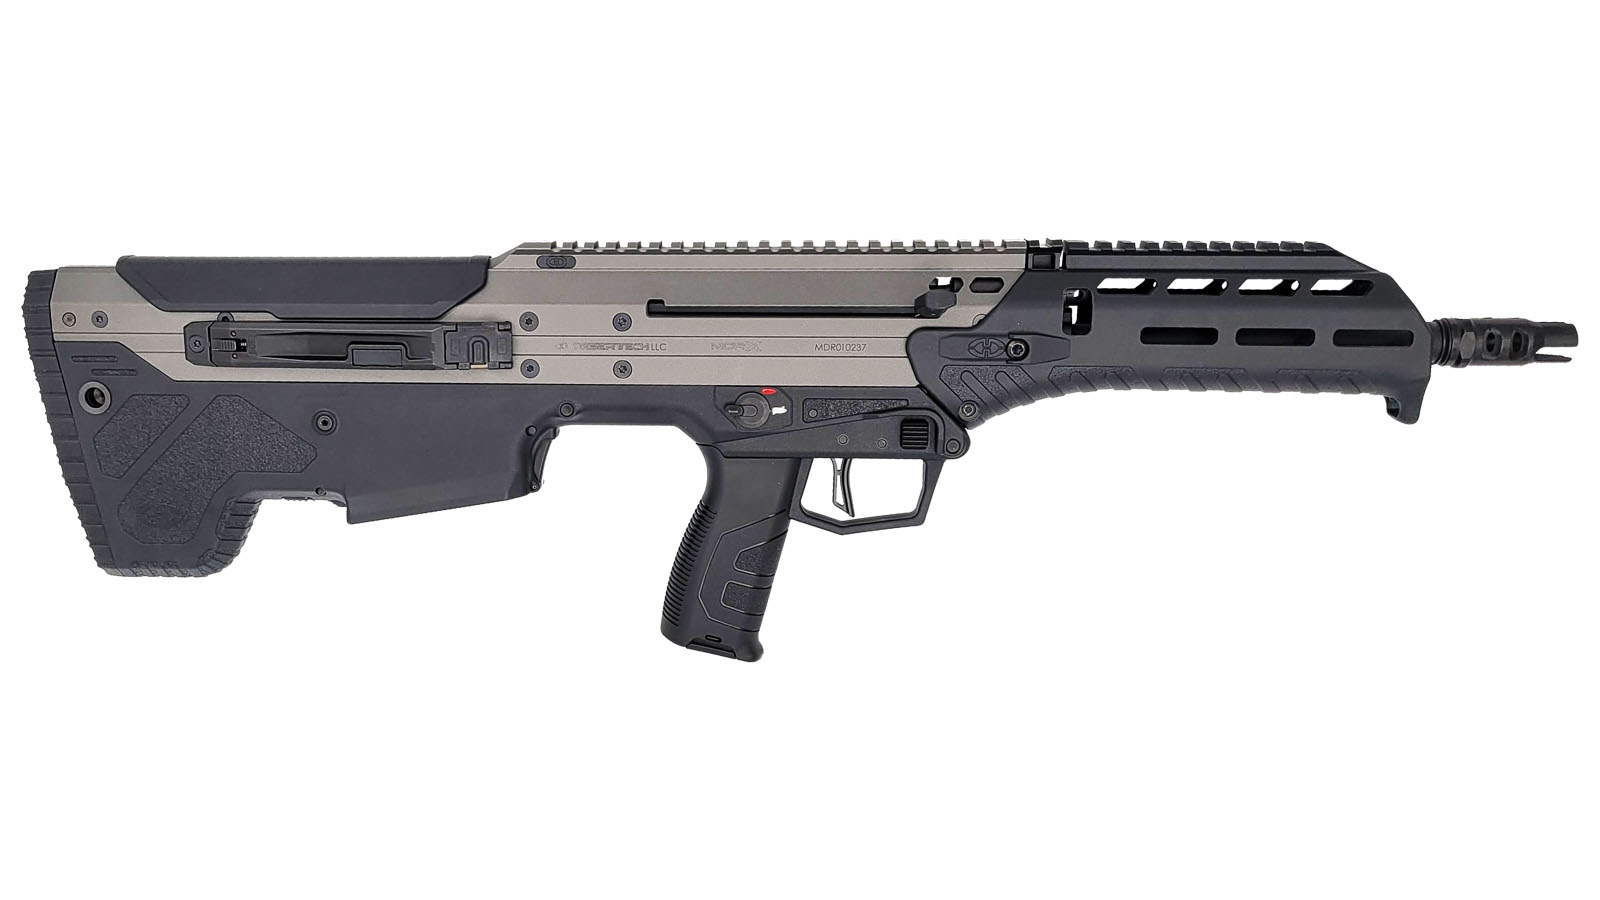 MDRx Rifle, 556NATO 223Rem 16" 10rd Forward-Ejection Tungsten